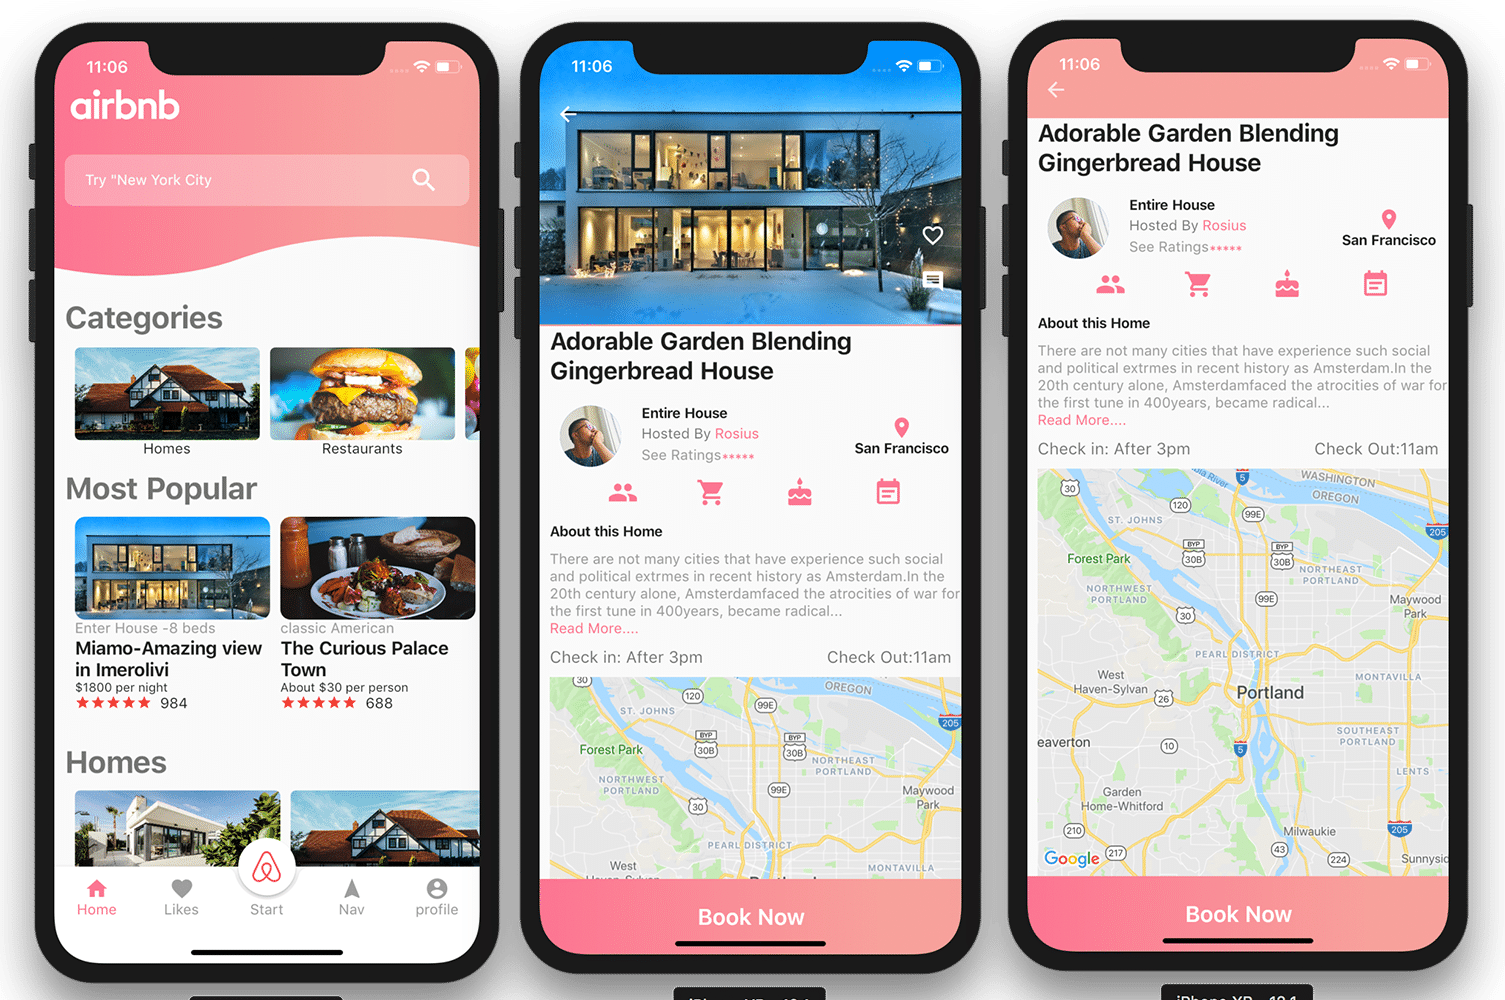 Airbnb lets people rent or find spaces in different locations.